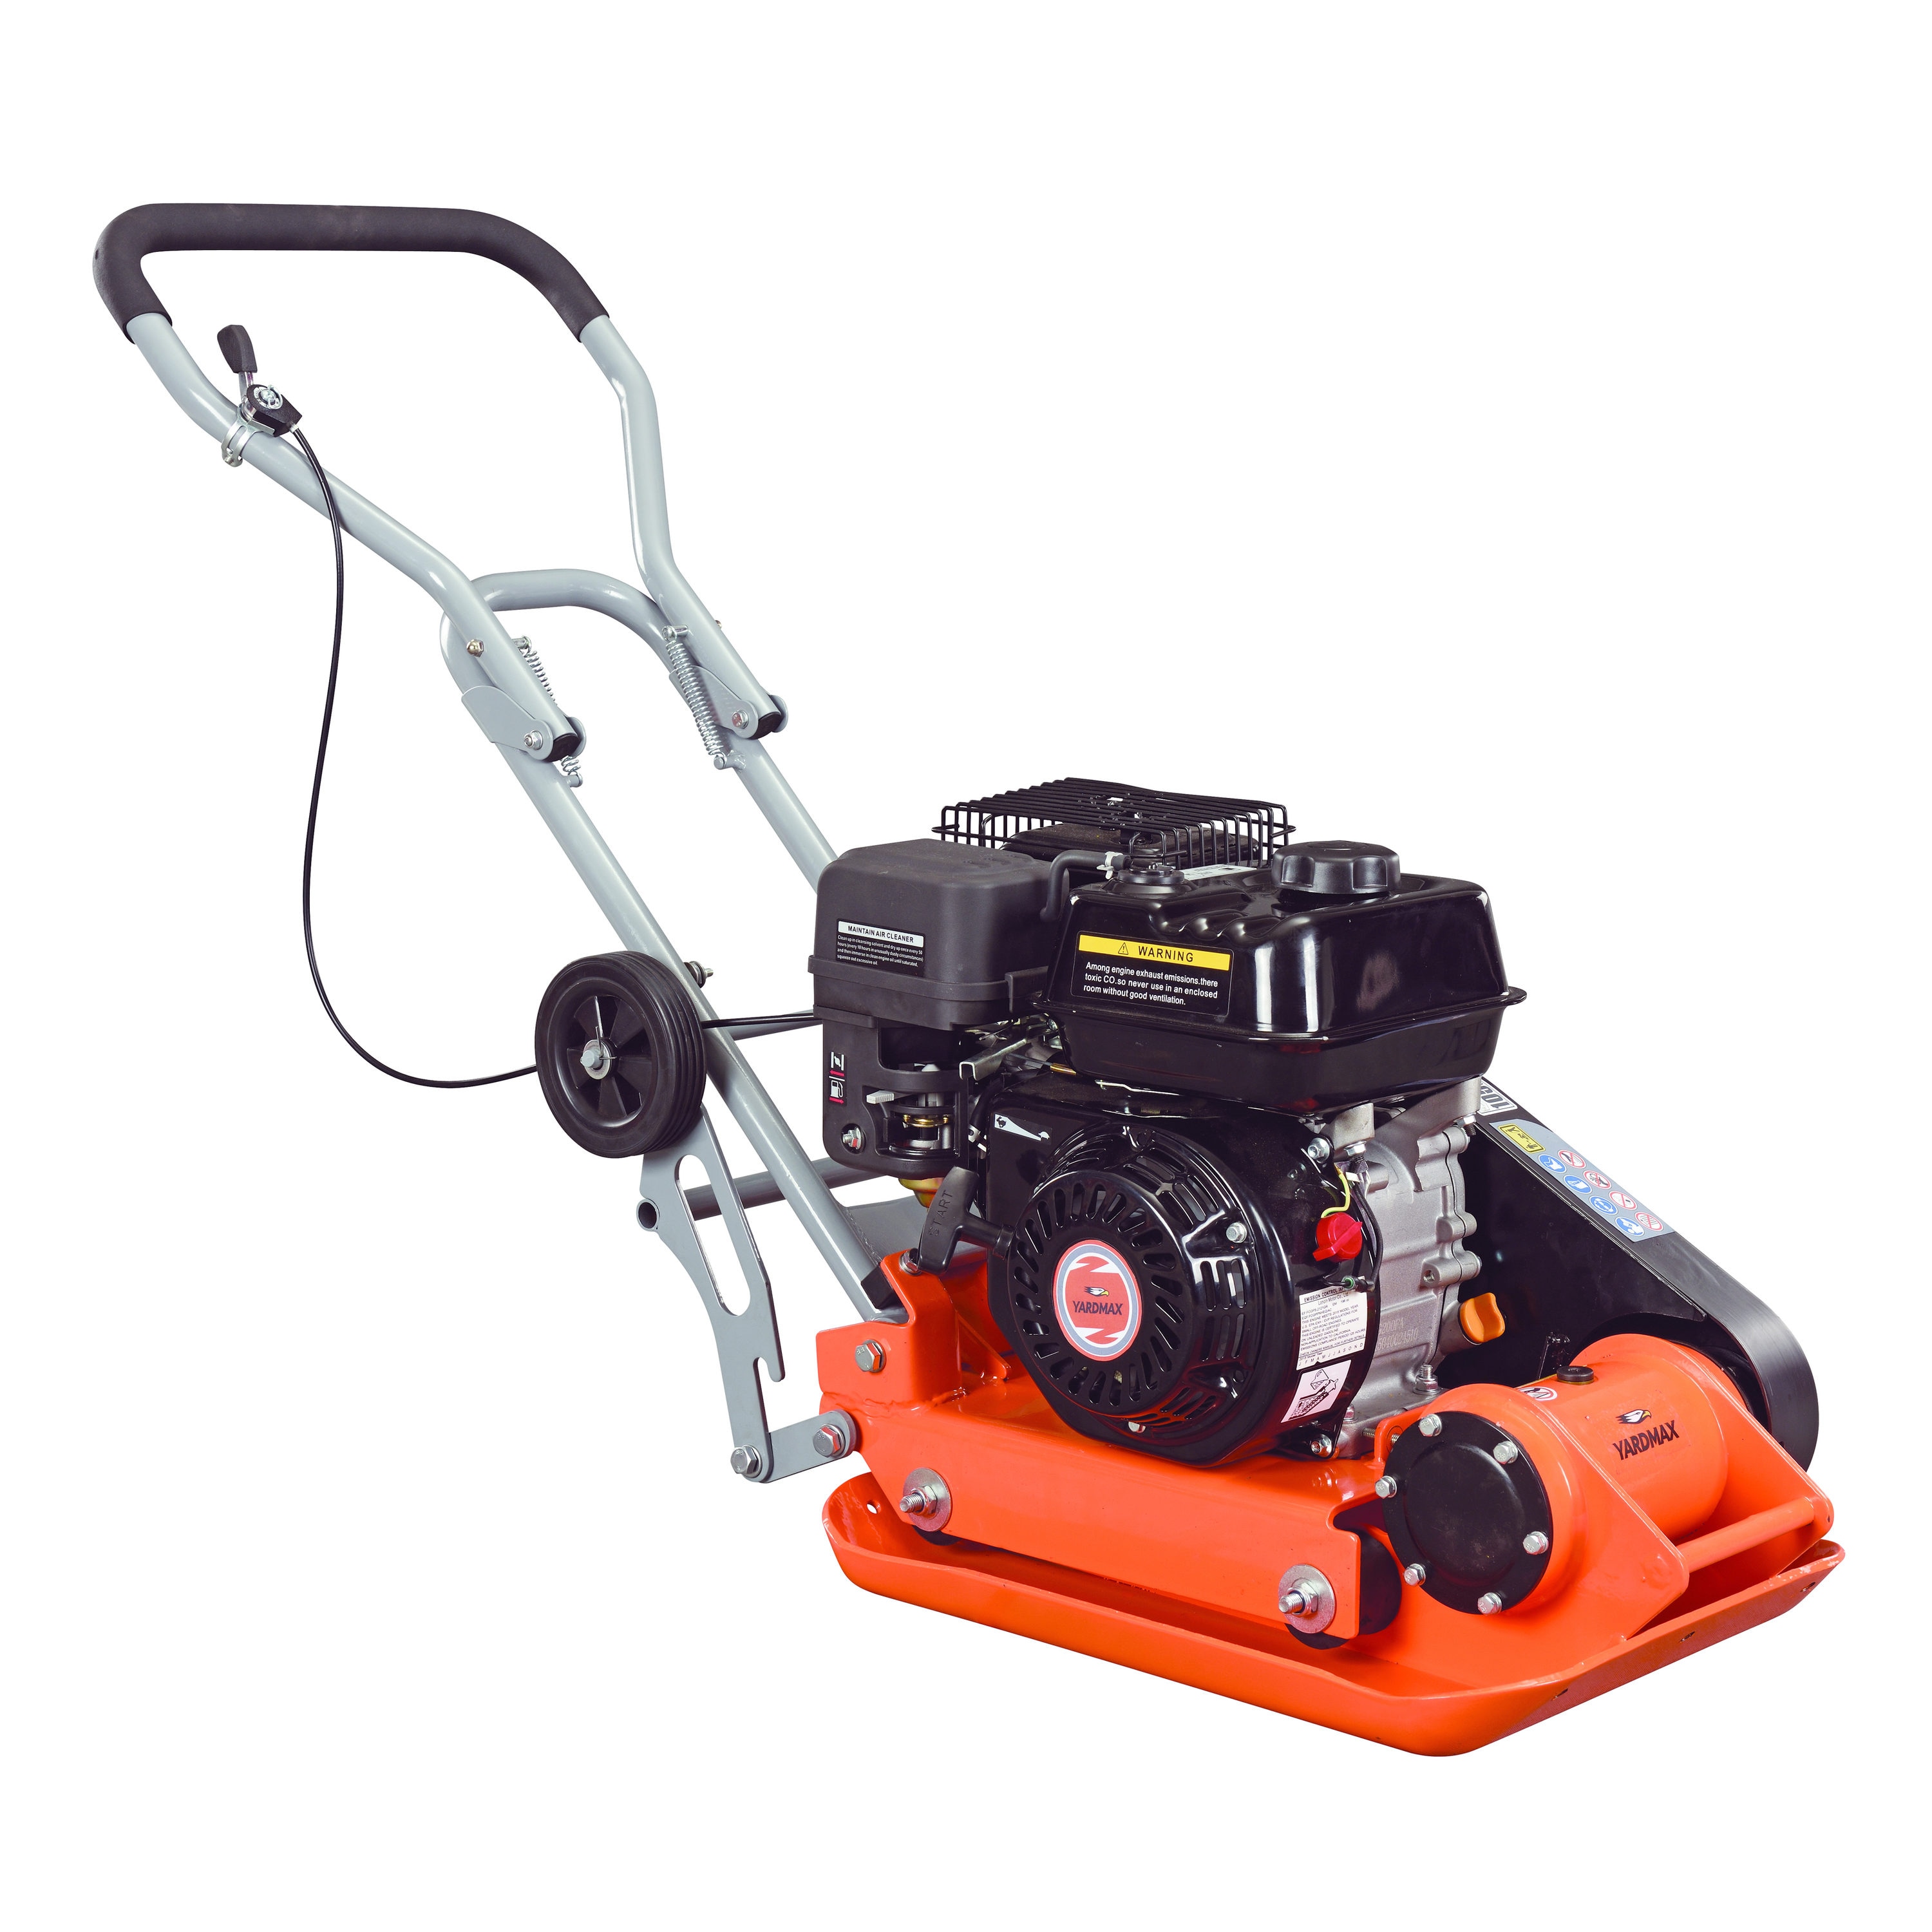 PRO-SERIES 6.5 HP 196 cc Plate Compactor with 3,000 lbs